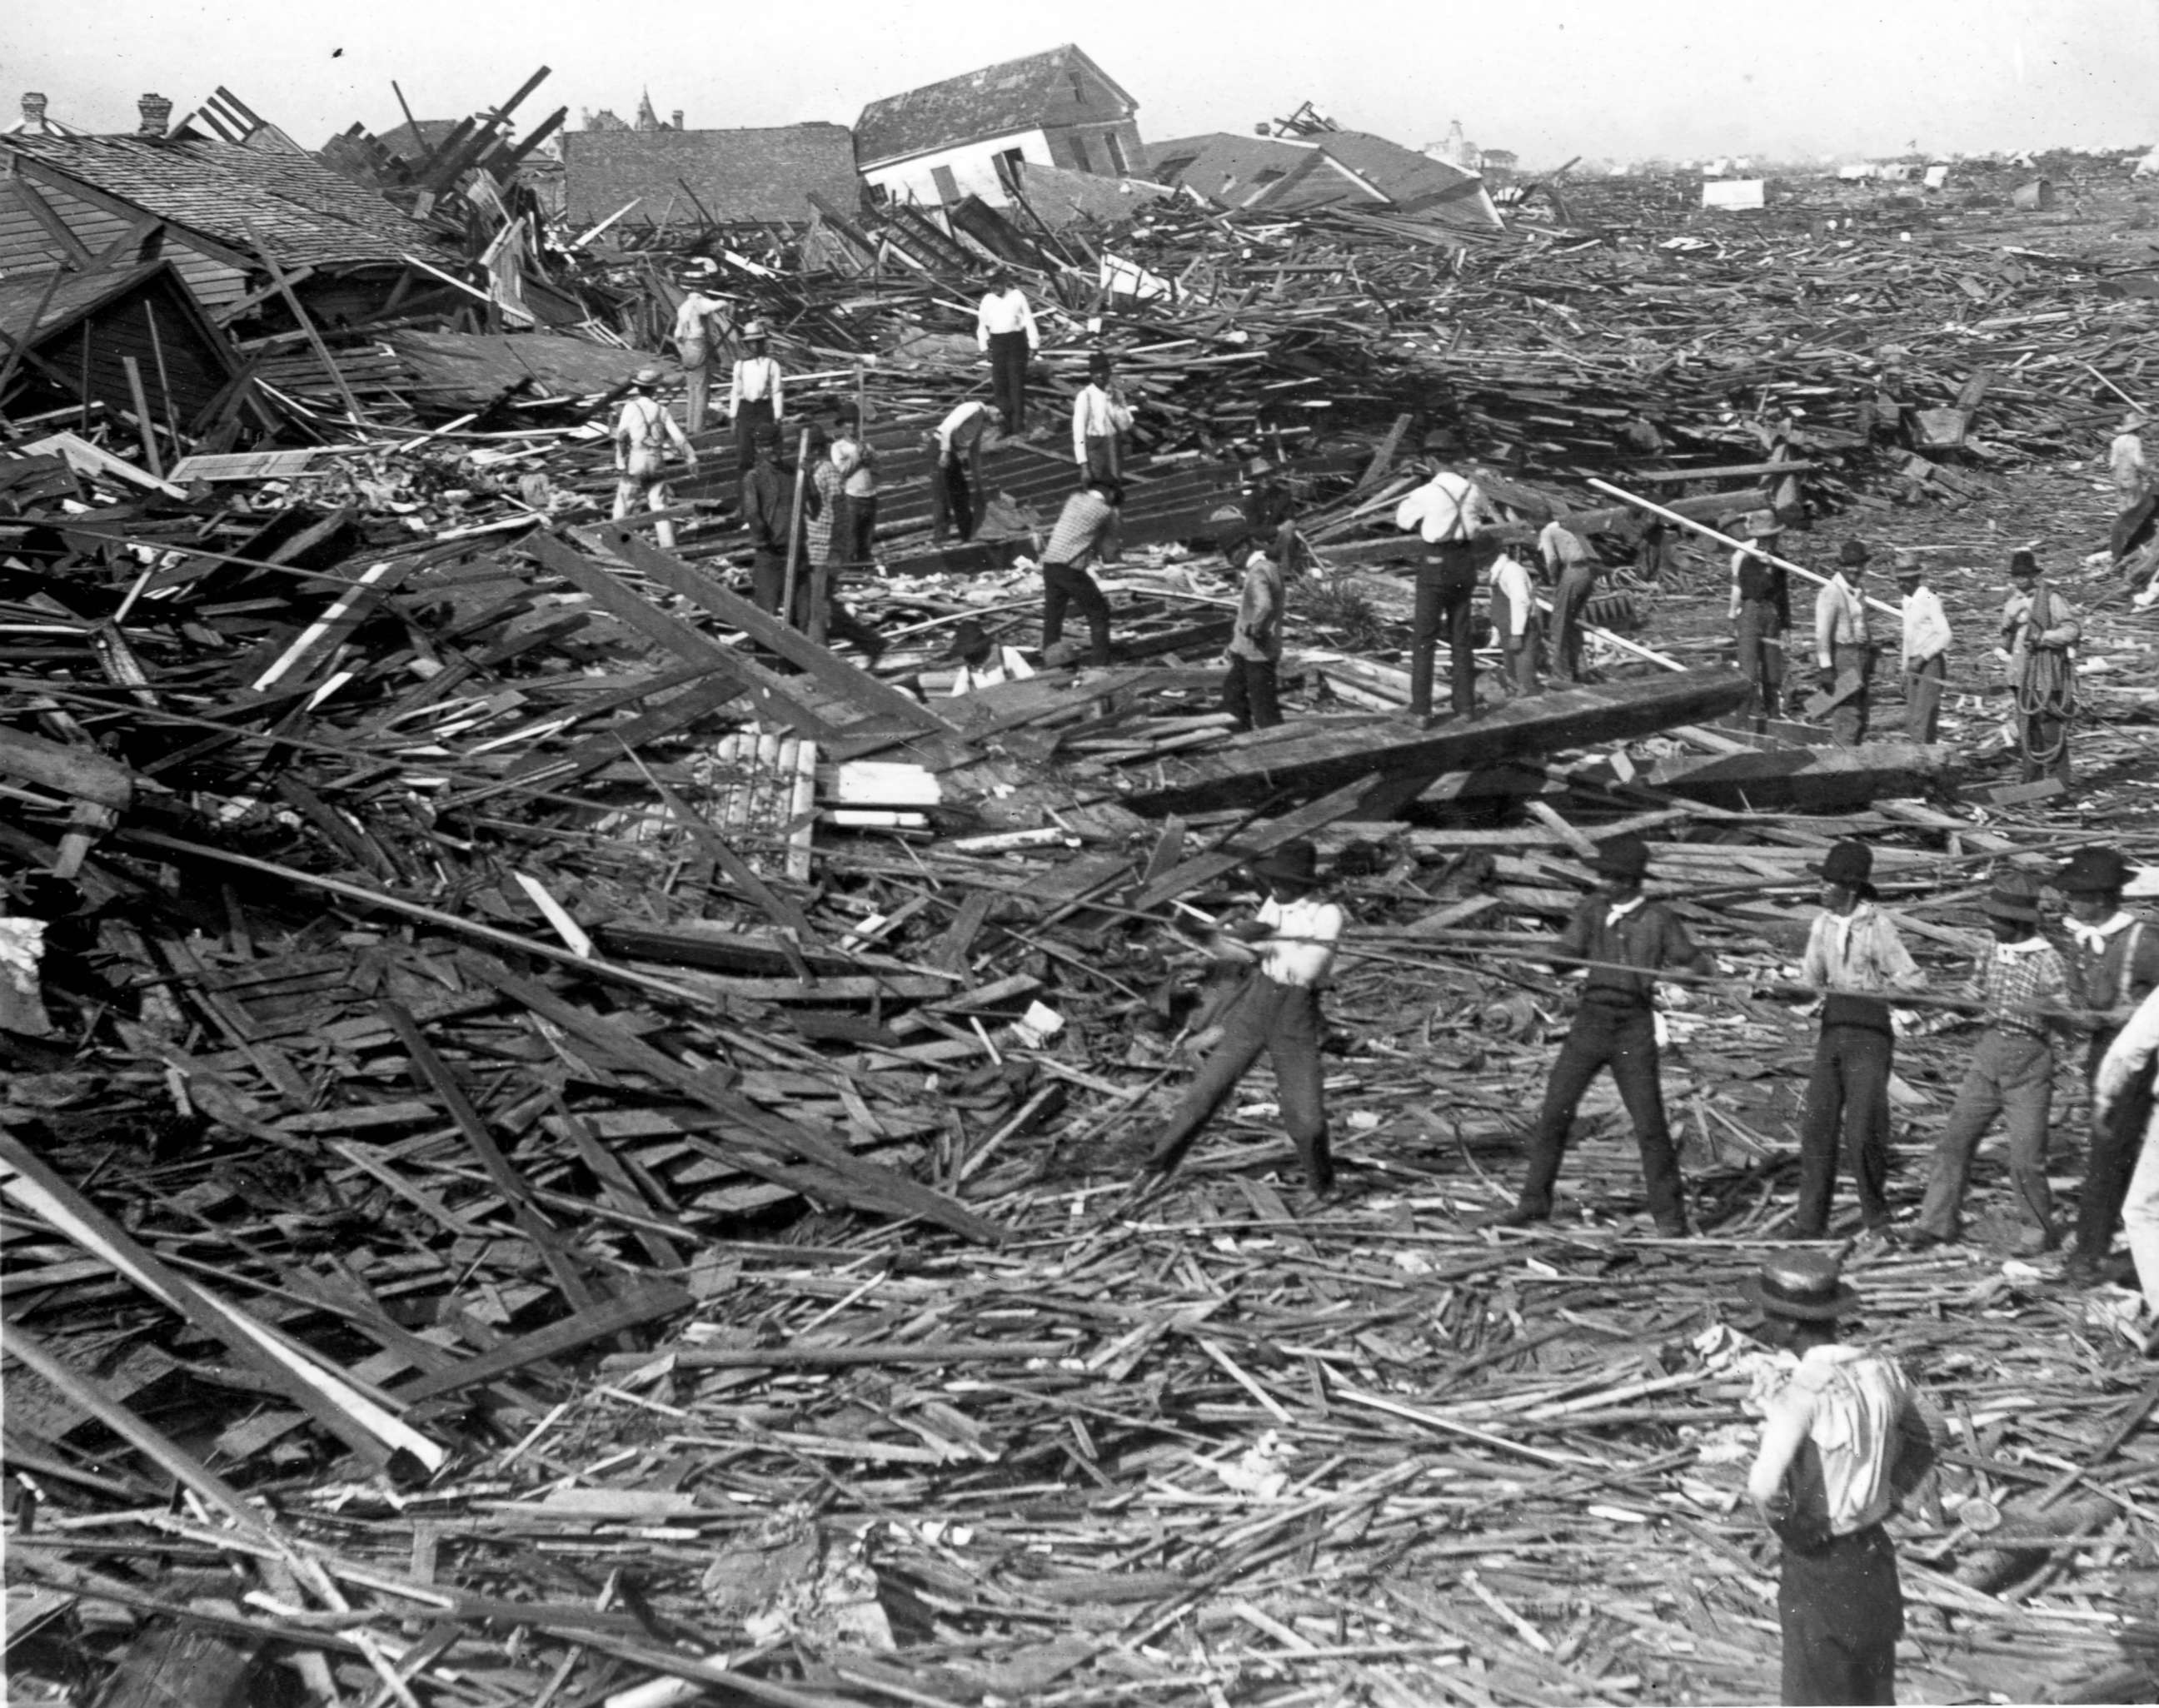 PHOTO: Men use ropes to pull away the debris of houses in order to look for bodies, after the Galveston Hurricane of 1900.